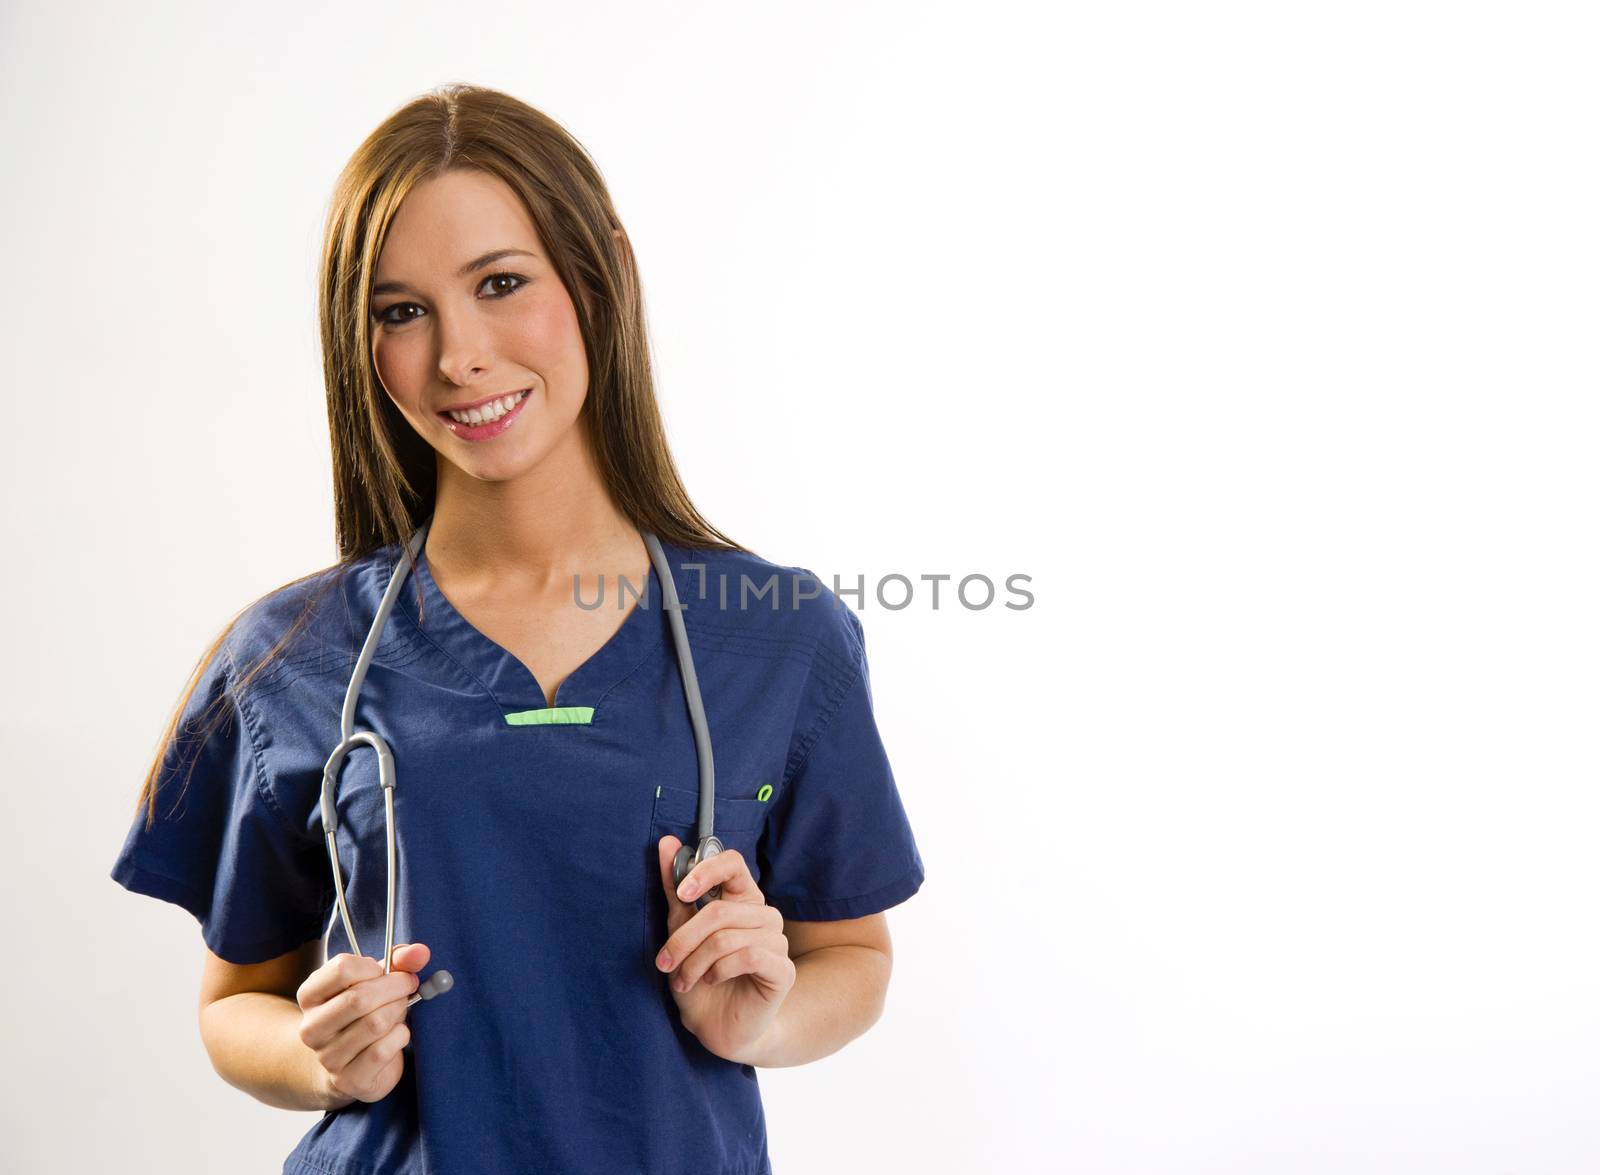 Vibrant Nurse Smiles at Camera Holding Stethoscope by ChrisBoswell